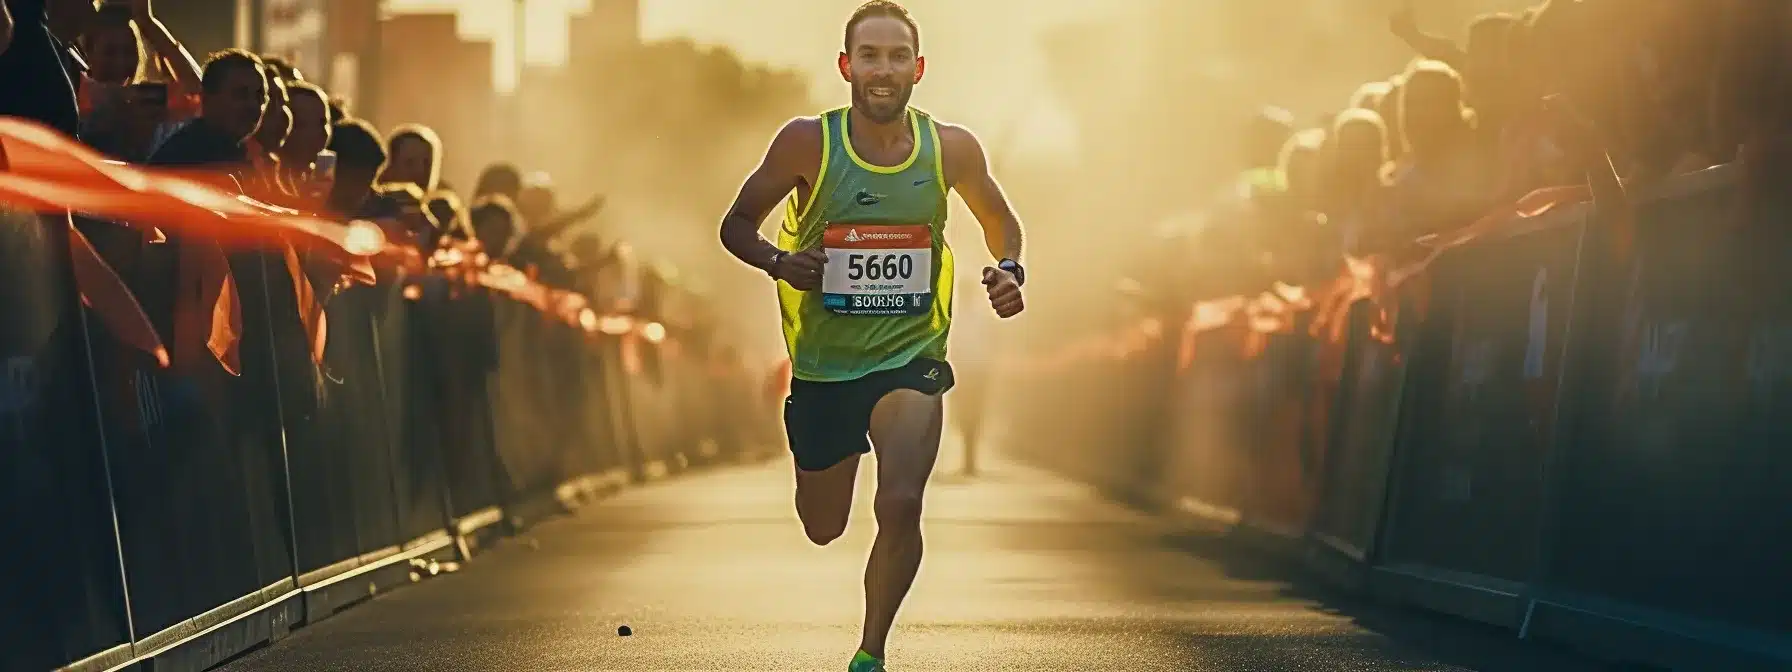 A Person Running A Marathon With A Finish Line In Sight, Representing The Journey Of Boosting Brand Identity Online.